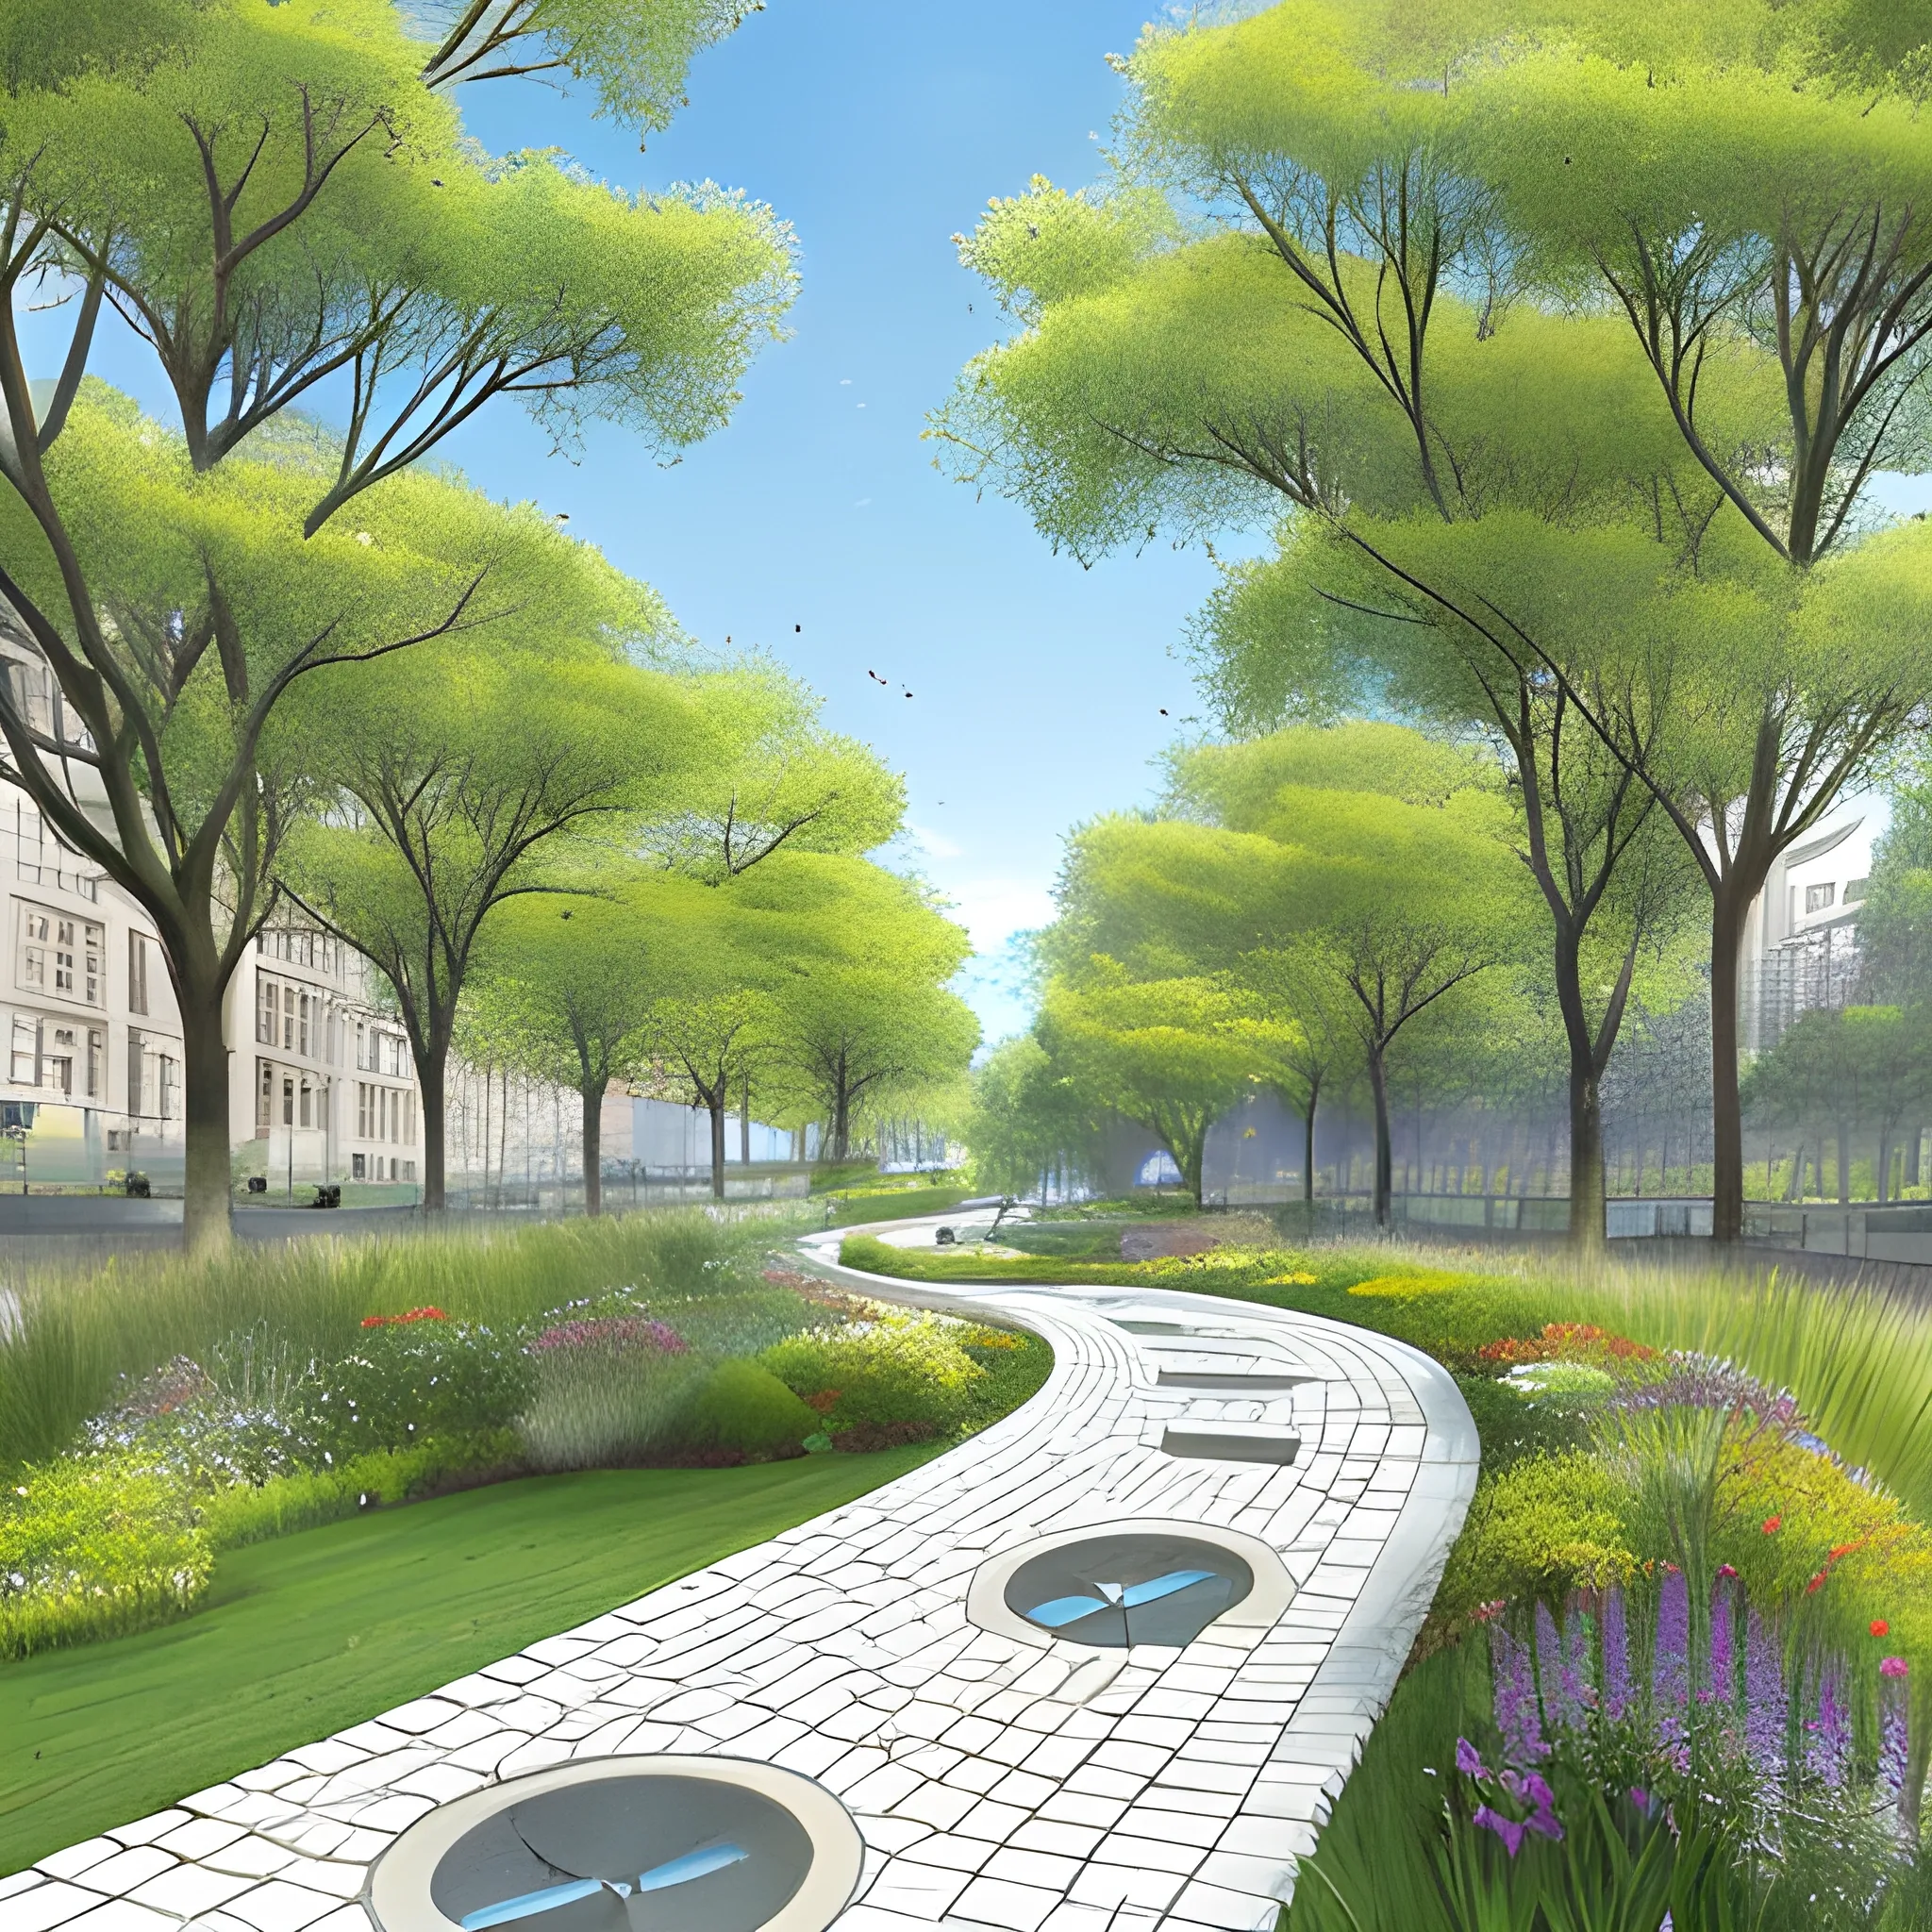 
Imagine an enchanting urban scene where a gentle watercourse meanders through a grassy expanse, artfully designed as a pedestrian thoroughfare for rainwater drainage. The watercourse bed, devoid of water, serves as a paved walkway, bordered by terraced grassy banks. The path, with a bottom width of one and a half meters, is paved with scattered stones to facilitate drainage when it rains. Adjacent to the watercourse, a tree-lined bike path winds its way through the urban landscape.

In dry weather, the watercourse bed becomes a serene grass and stone pedestrian walkway, inviting citizens to stroll and relax amidst the natural surroundings. Children play and explore along the grassy terraces flanking the watercourse, while adults enjoy leisurely walks or bike rides along the shaded path.

Picture yourself wandering along the watercourse on a sunny day, the sound of footsteps echoing against the stone pavement, while birds chirp in the nearby trees. Cyclists glide past on the tree-lined bike path, immersed in the tranquility of the urban oasis. This is the captivating essence of the urban watercourse—a harmonious blend of nature and functional design, offering both practicality and aesthetic appeal to city dwellers., 3D, Pencil Sketch